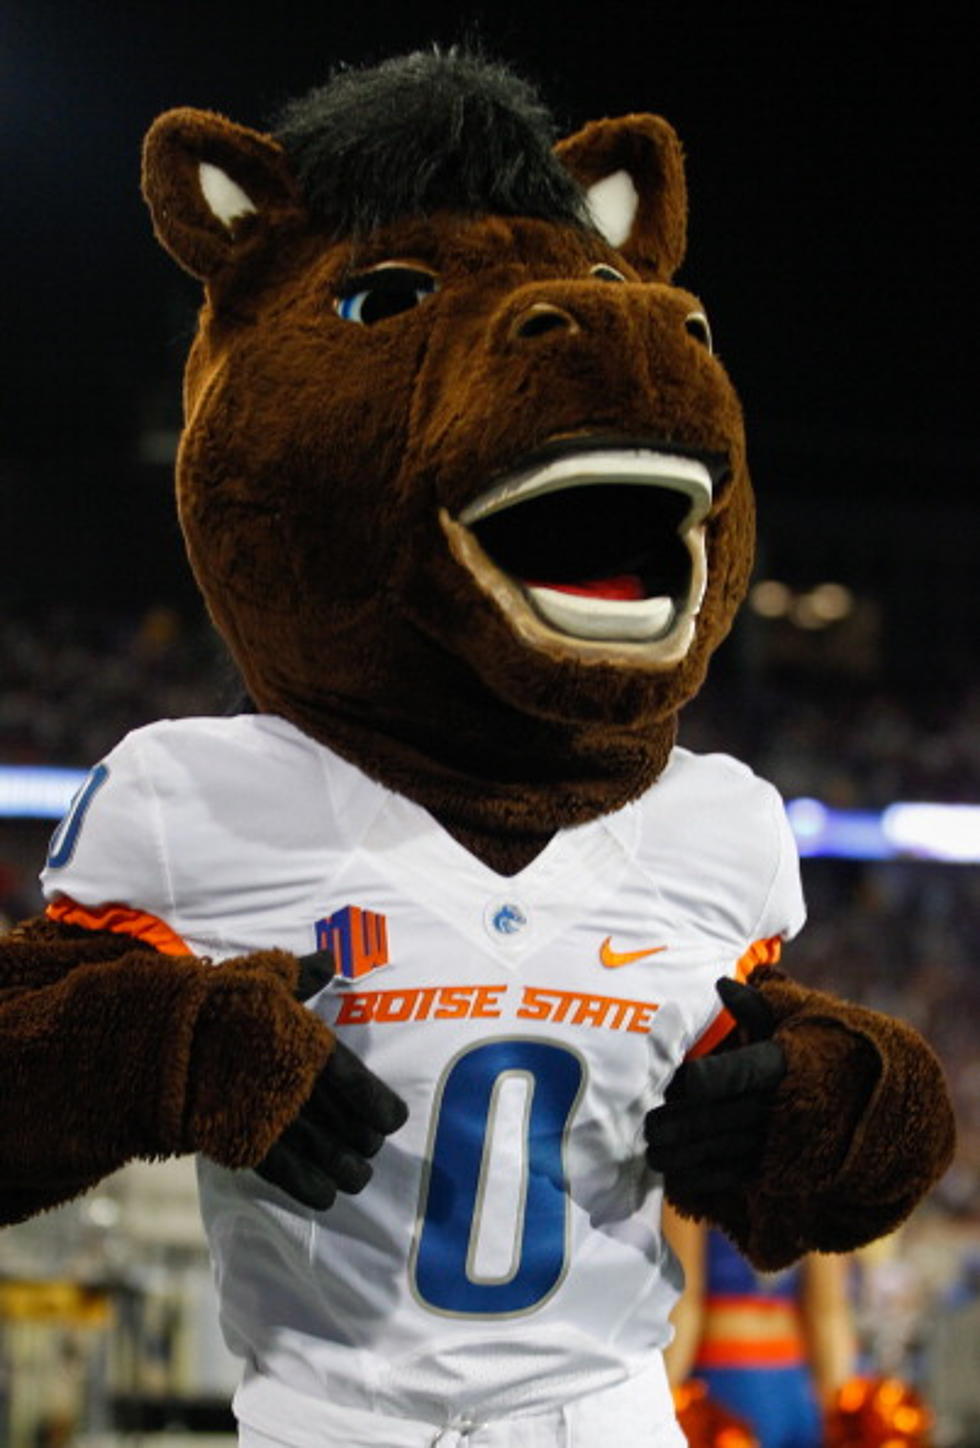 Boise State out to Prove Last Year was Just a Radar Glitch